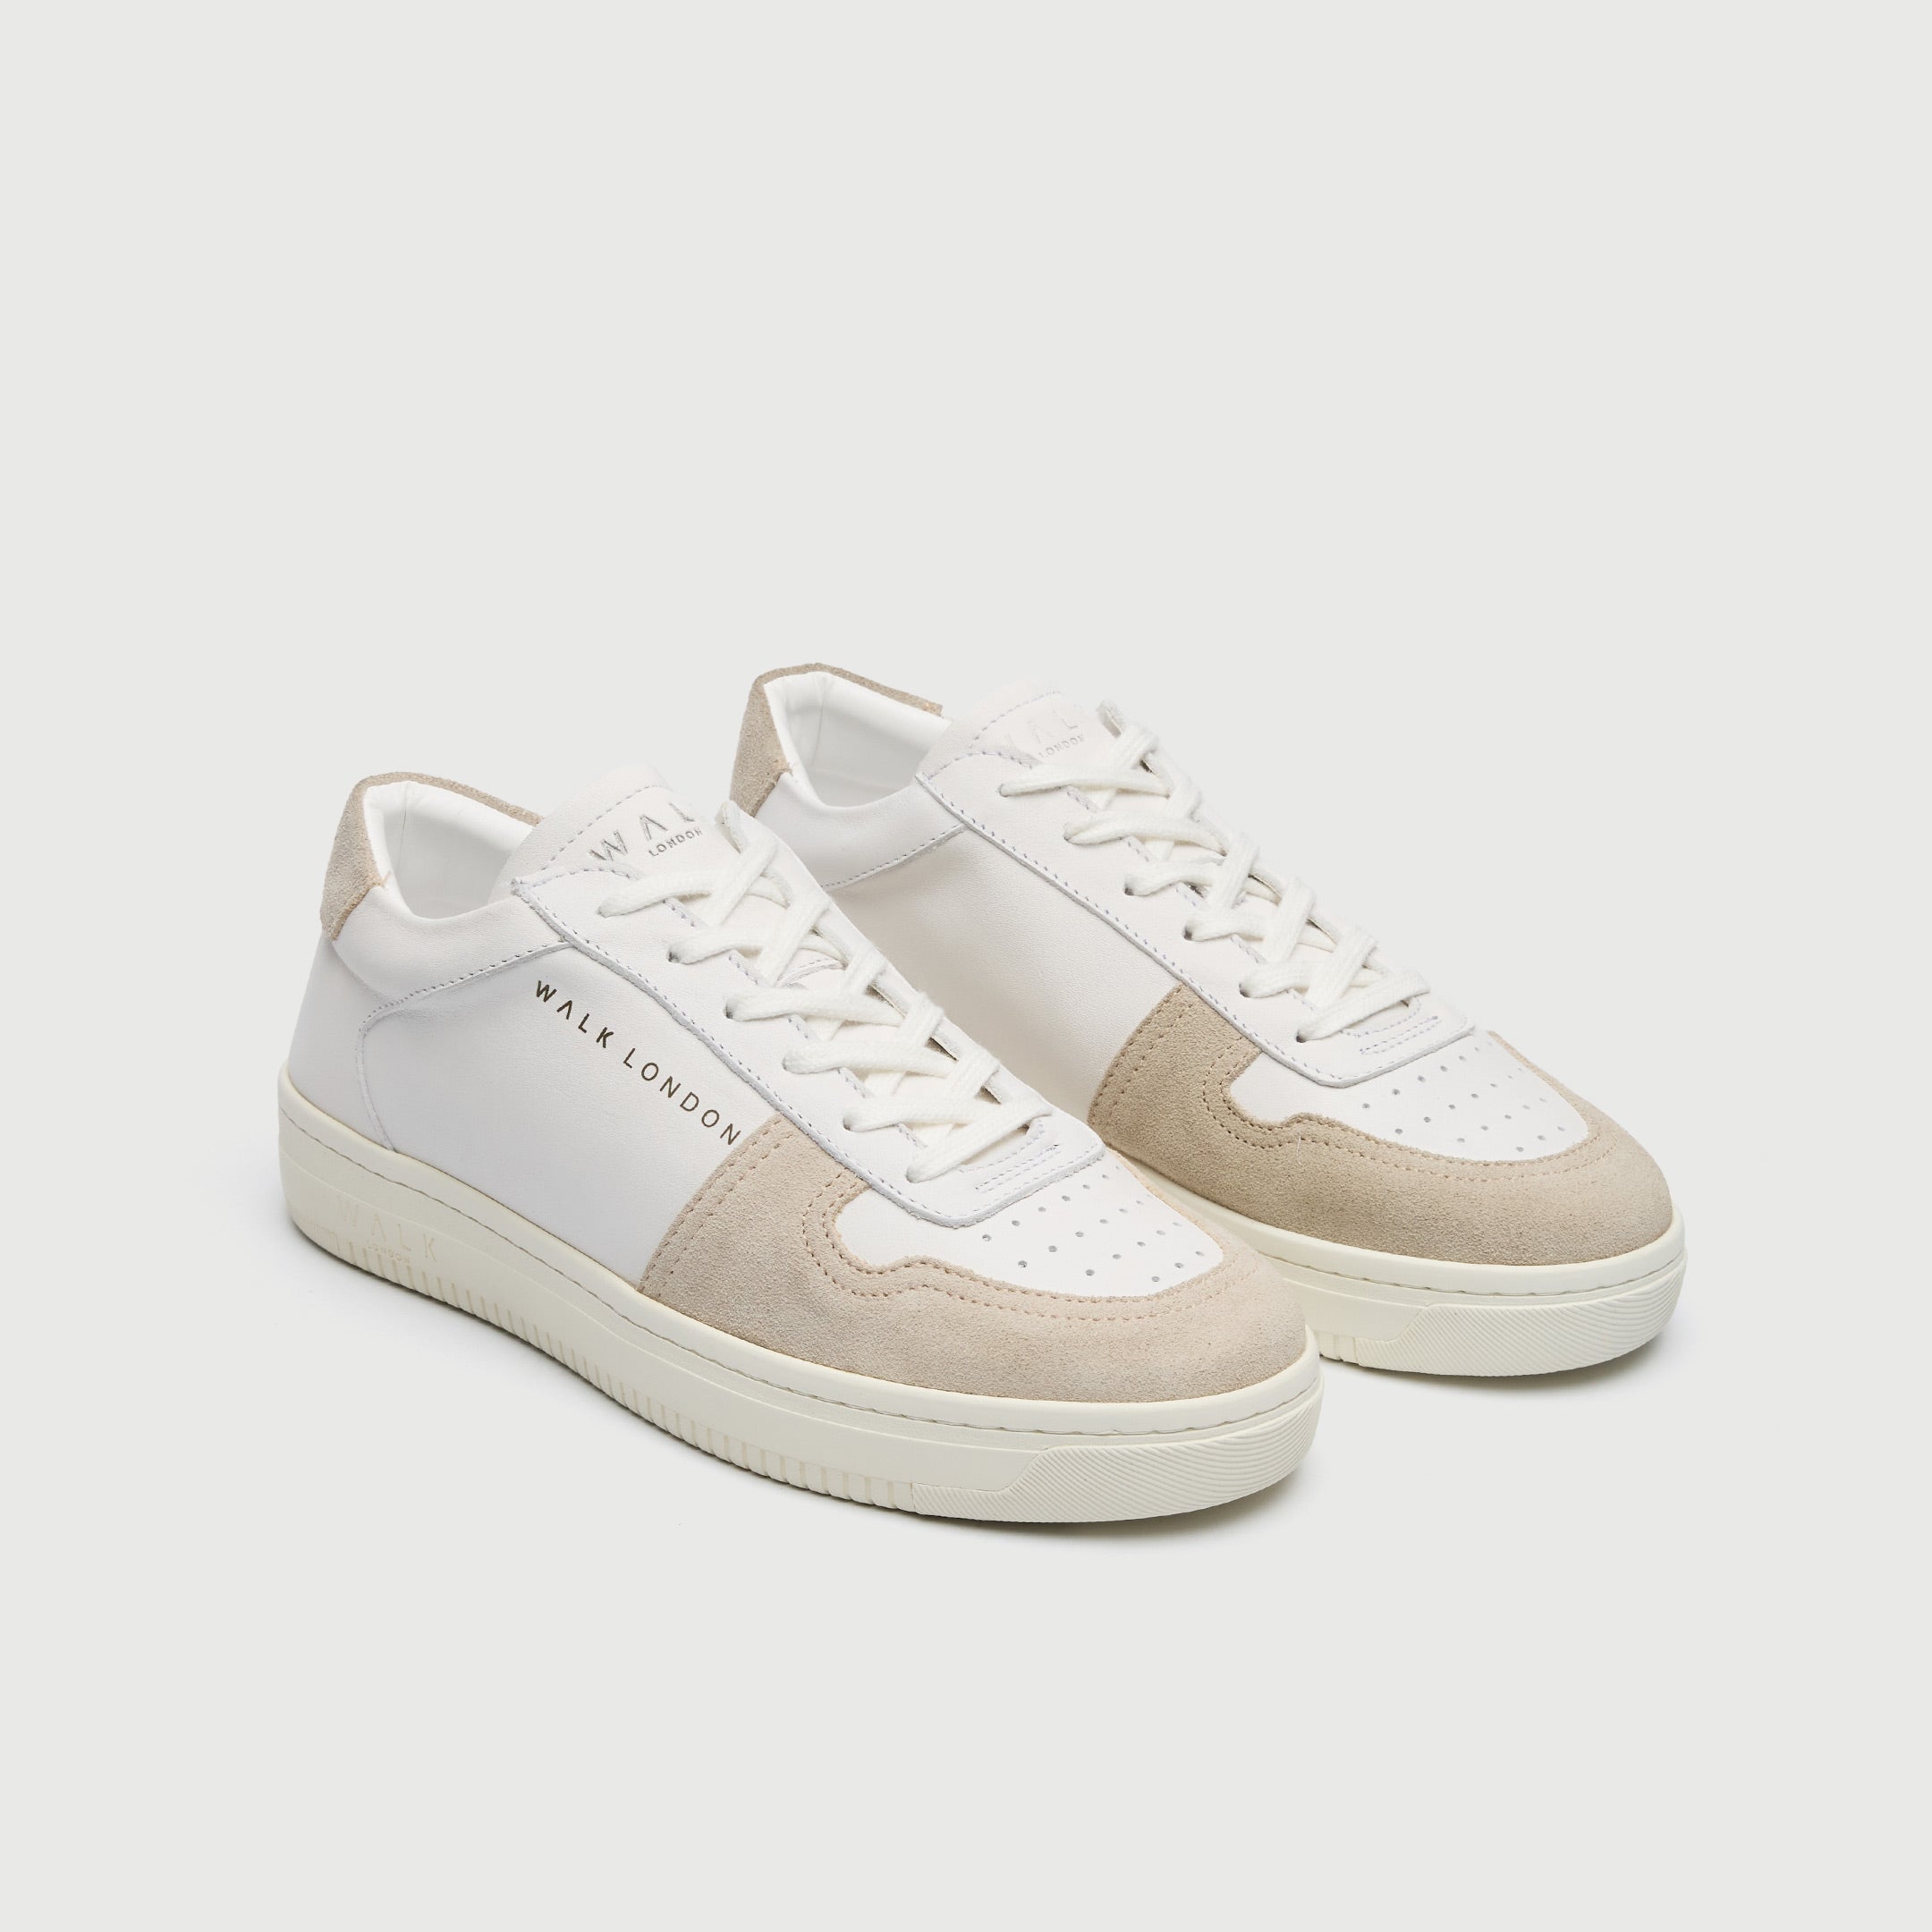 WALK London Mens Neo Sneaker in White Leather and Stone Suede